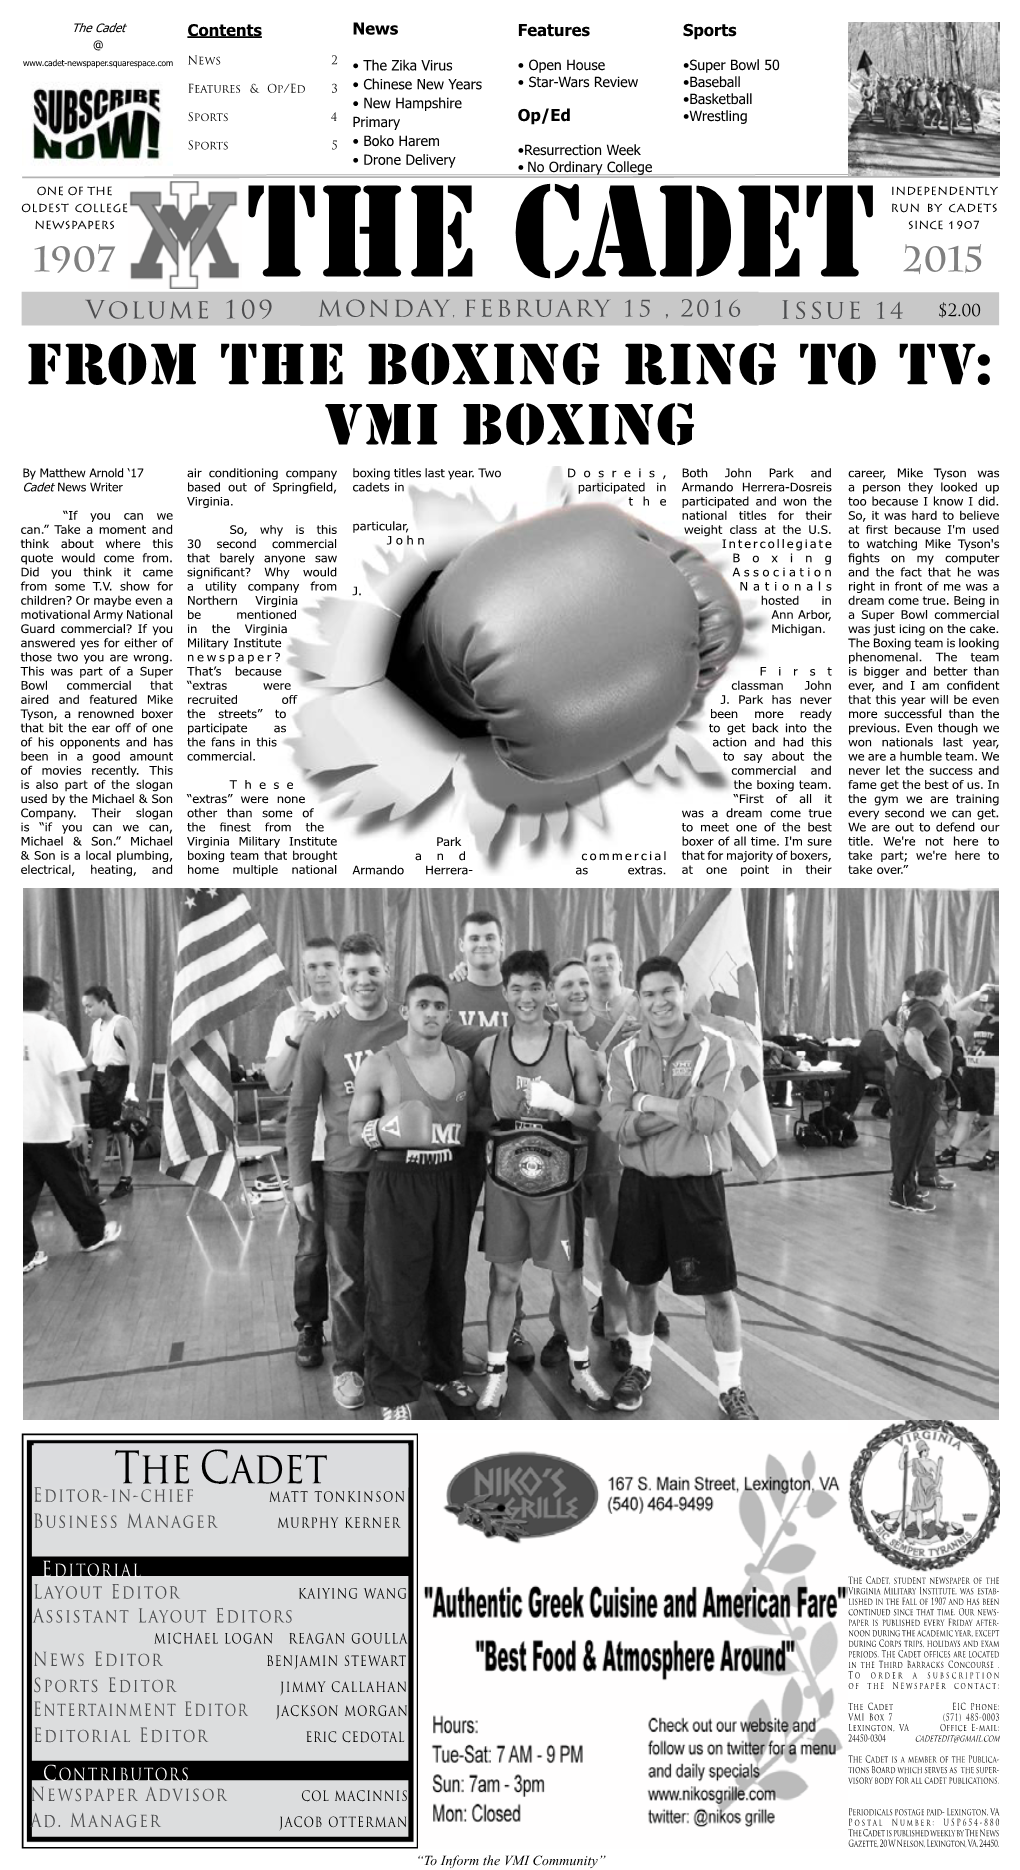 VMI BOXING by Matthew Arnold ‘17 Air Conditioning Company Boxing Titles Last Year